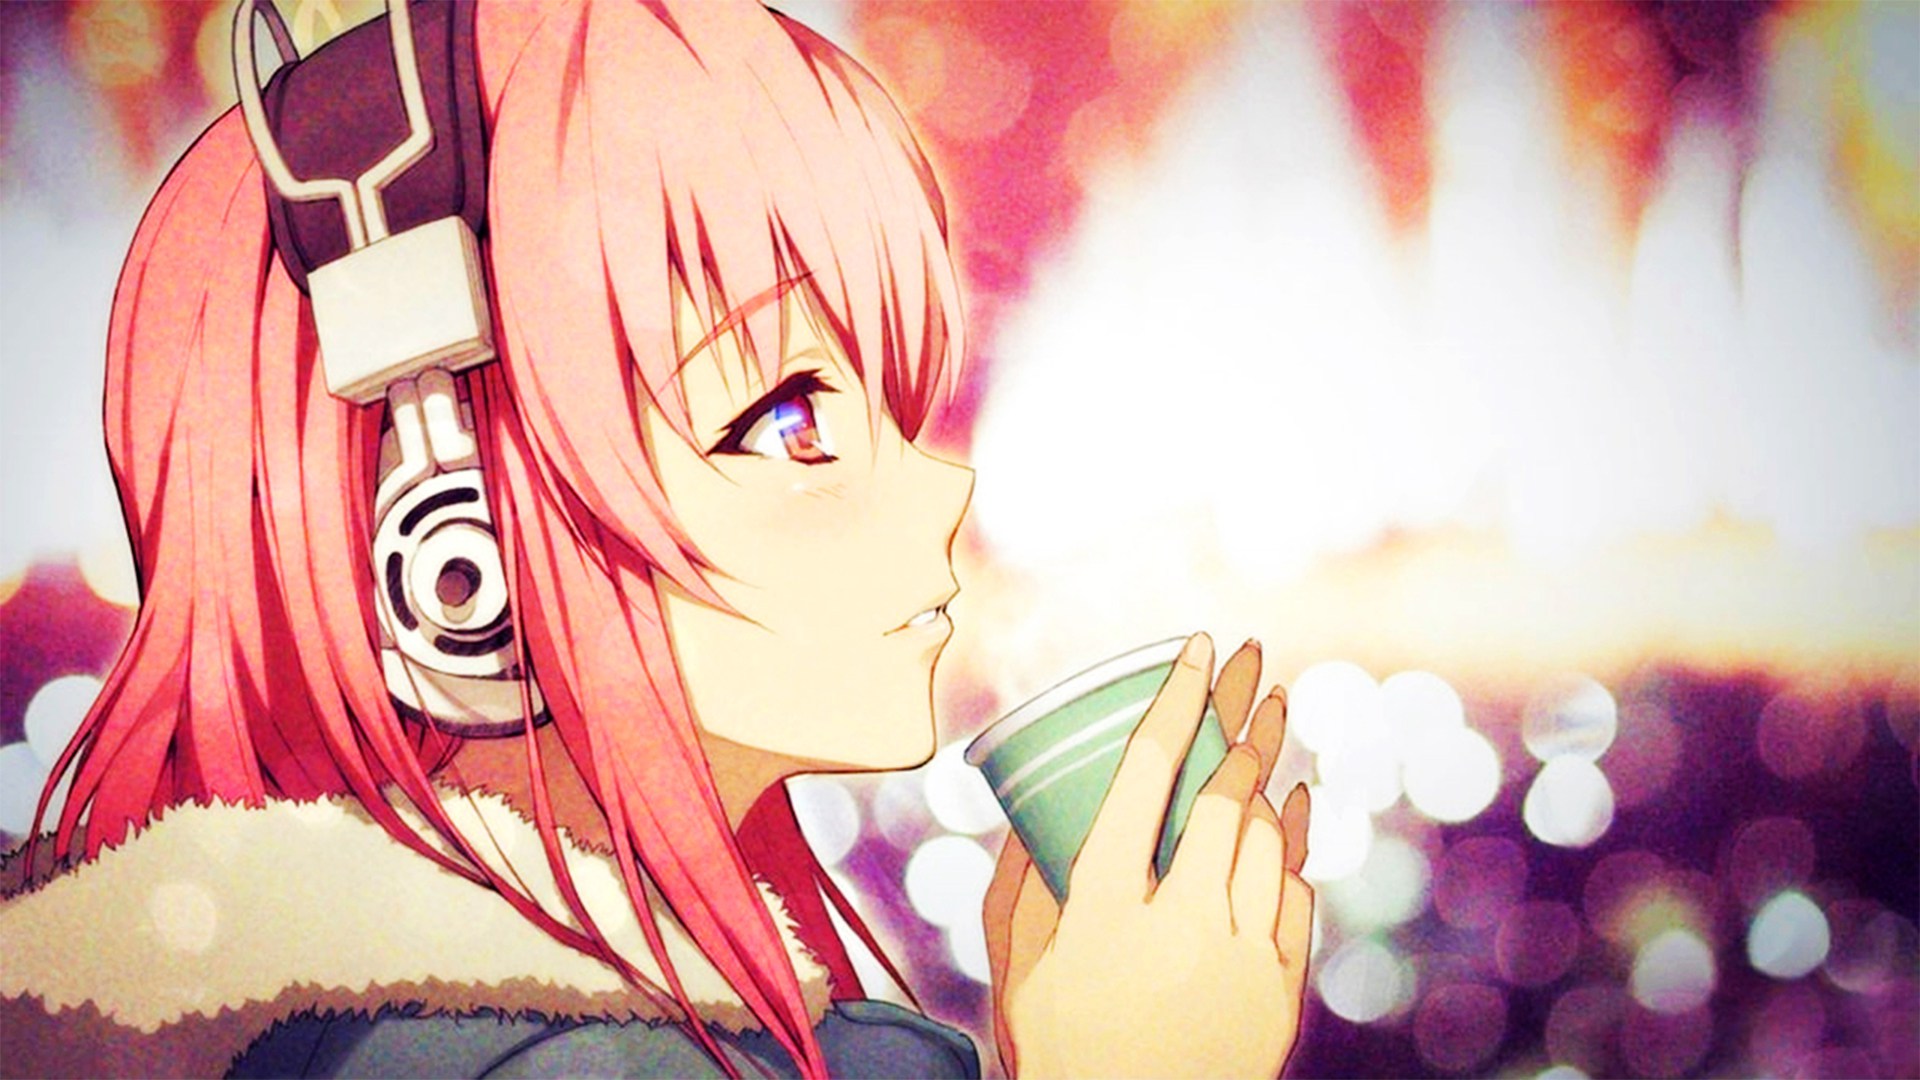 Hd Wallpaper Cute Anime Girl With Mask And Headphone Background, Profile  Picture Unknown, Unknown, Profile Background Image And Wallpaper for Free  Download